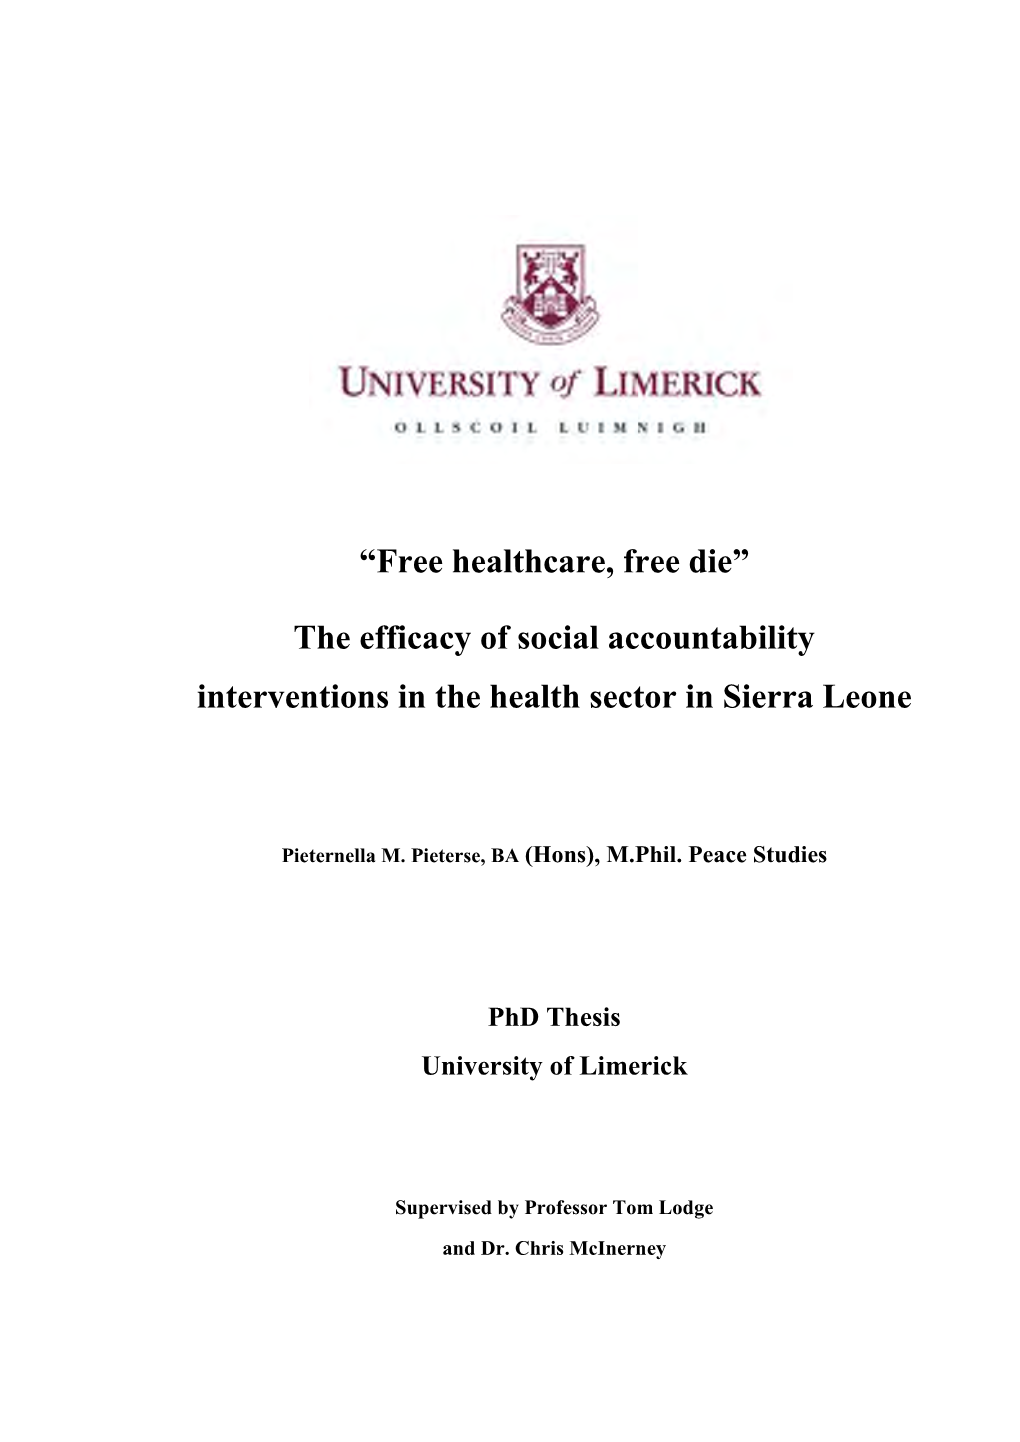 “Free Healthcare, Free Die” the Efficacy of Social Accountability Interventions in the Health Sector in Sierra Leone